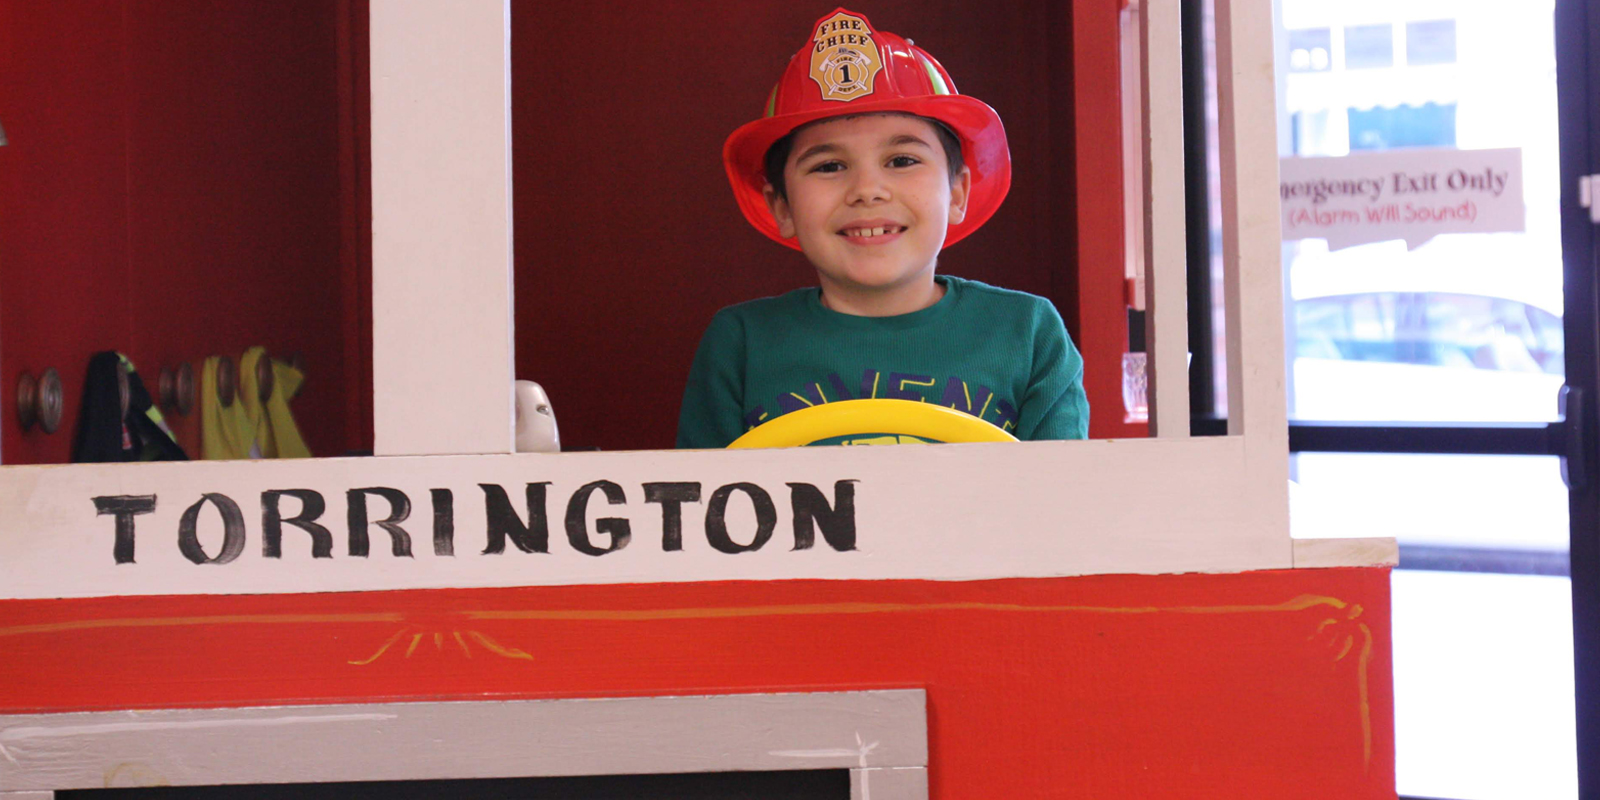 Young boy wearing a plastic fire hat and driving a play wooden fire truck